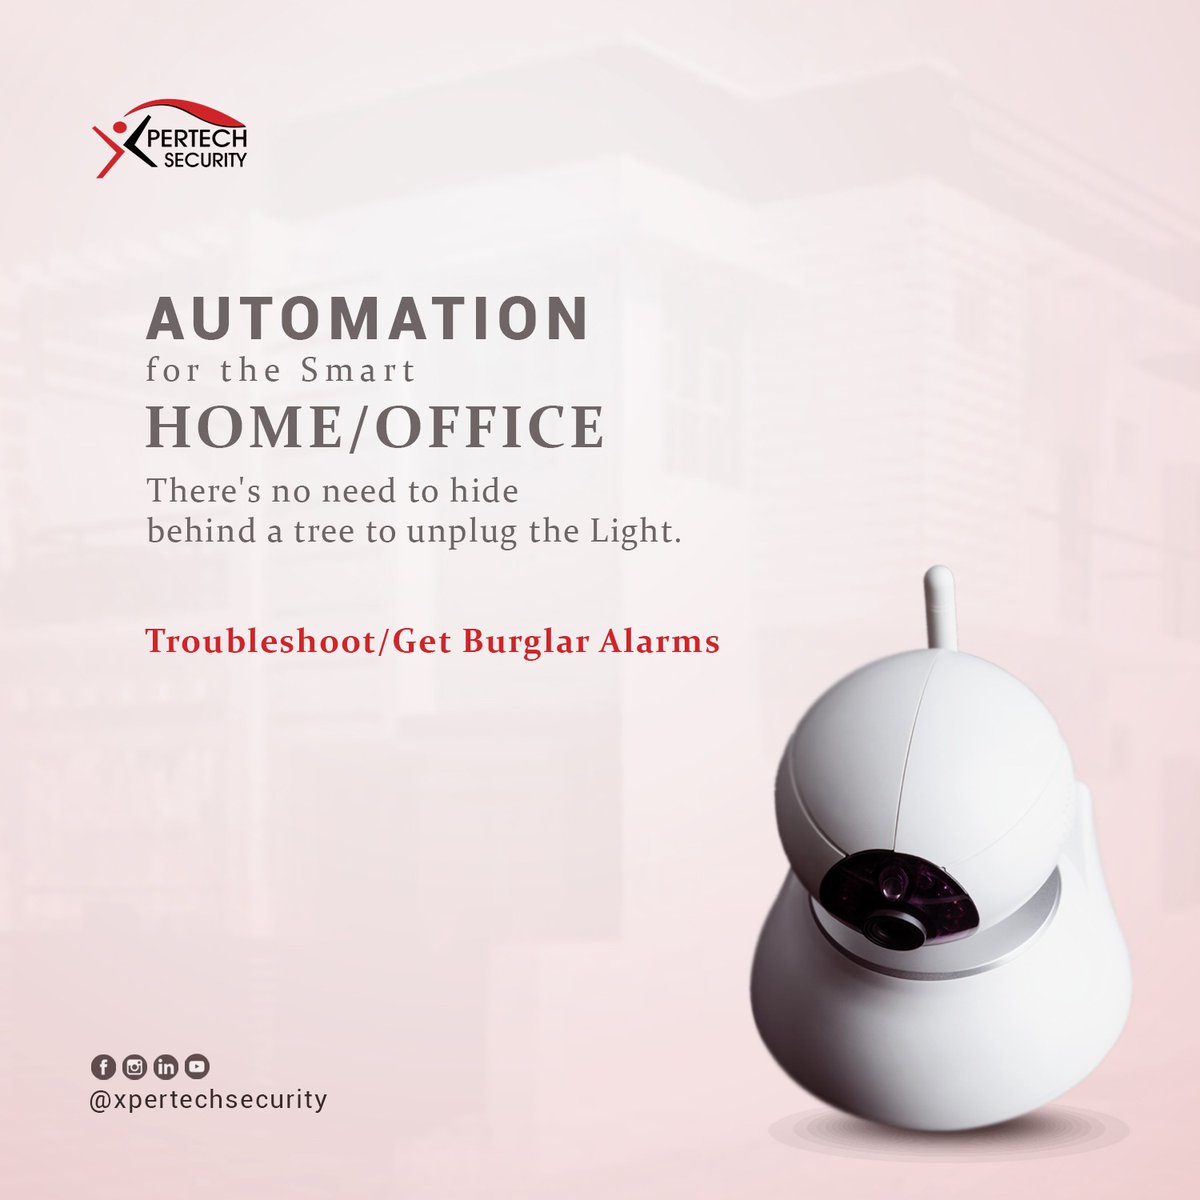 With our advanced burglar alarms, you can troubleshoot with ease and stay safe. Today, embrace the power of automation! 

Contact: +2348032882047

#ConvenienceAtYourFingertips #EnhancedSecurity #TroubleshootingMadeEasy #BurglarAlarms #EmbraceTheFuture